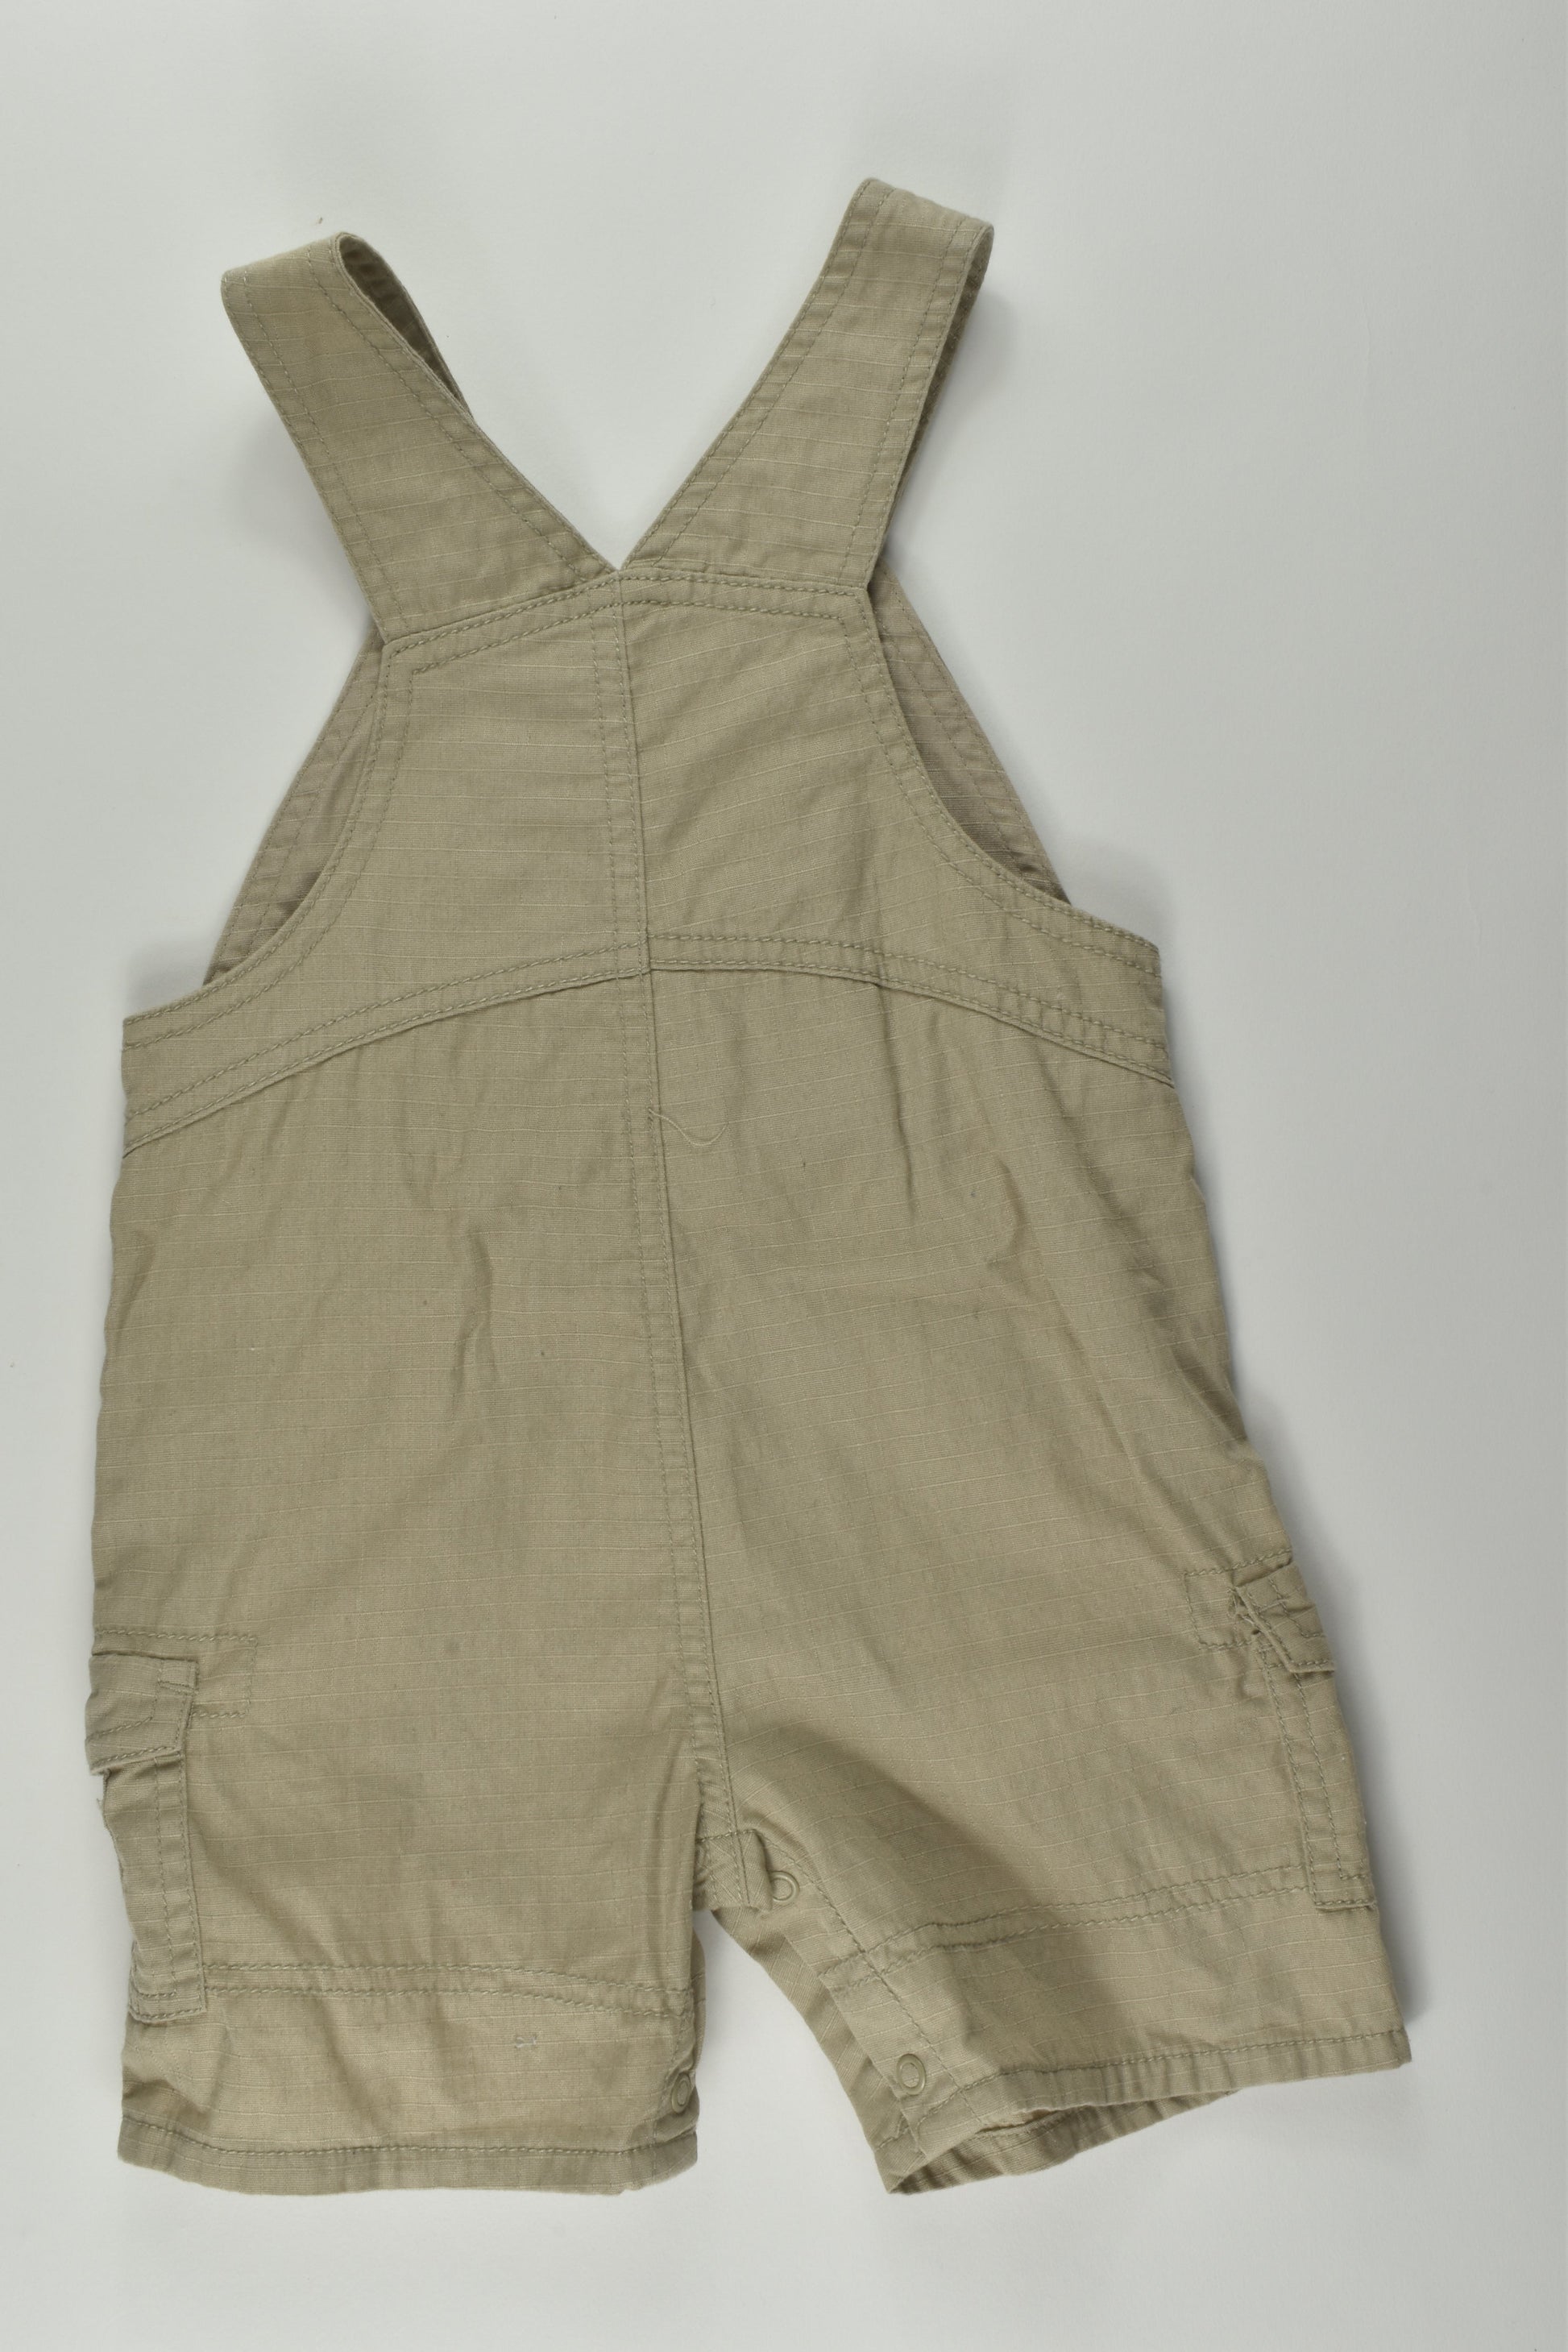 Mothercare Size 3-6 months Short Overalls